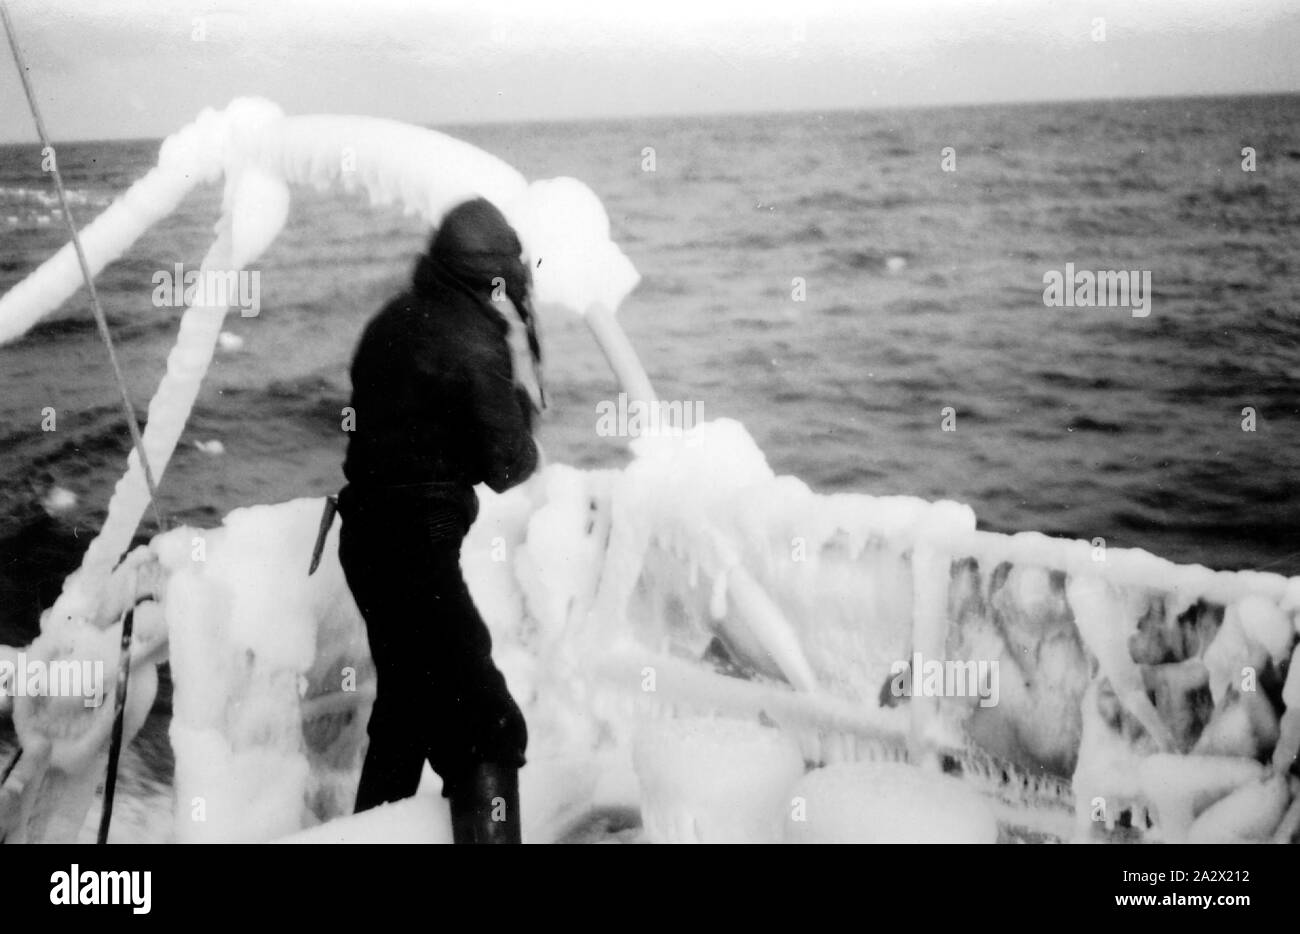 Photograph - by George Rayner, Antarctica, circa 1920s, Photograph taken during a series of scientific expeditions undertaken in the waters off Antarctica, during the late 1920s and 1930s. Probably taken by George W. Rayner, who was employed as a biologist on the expeditions. 'MacKenzie Sea' was the name originally given to Mackenzie Bay at the western end of the Amery Ice Shelf, about 32 kilometres northeast of Foley Peninsula, Antarctica Stock Photo